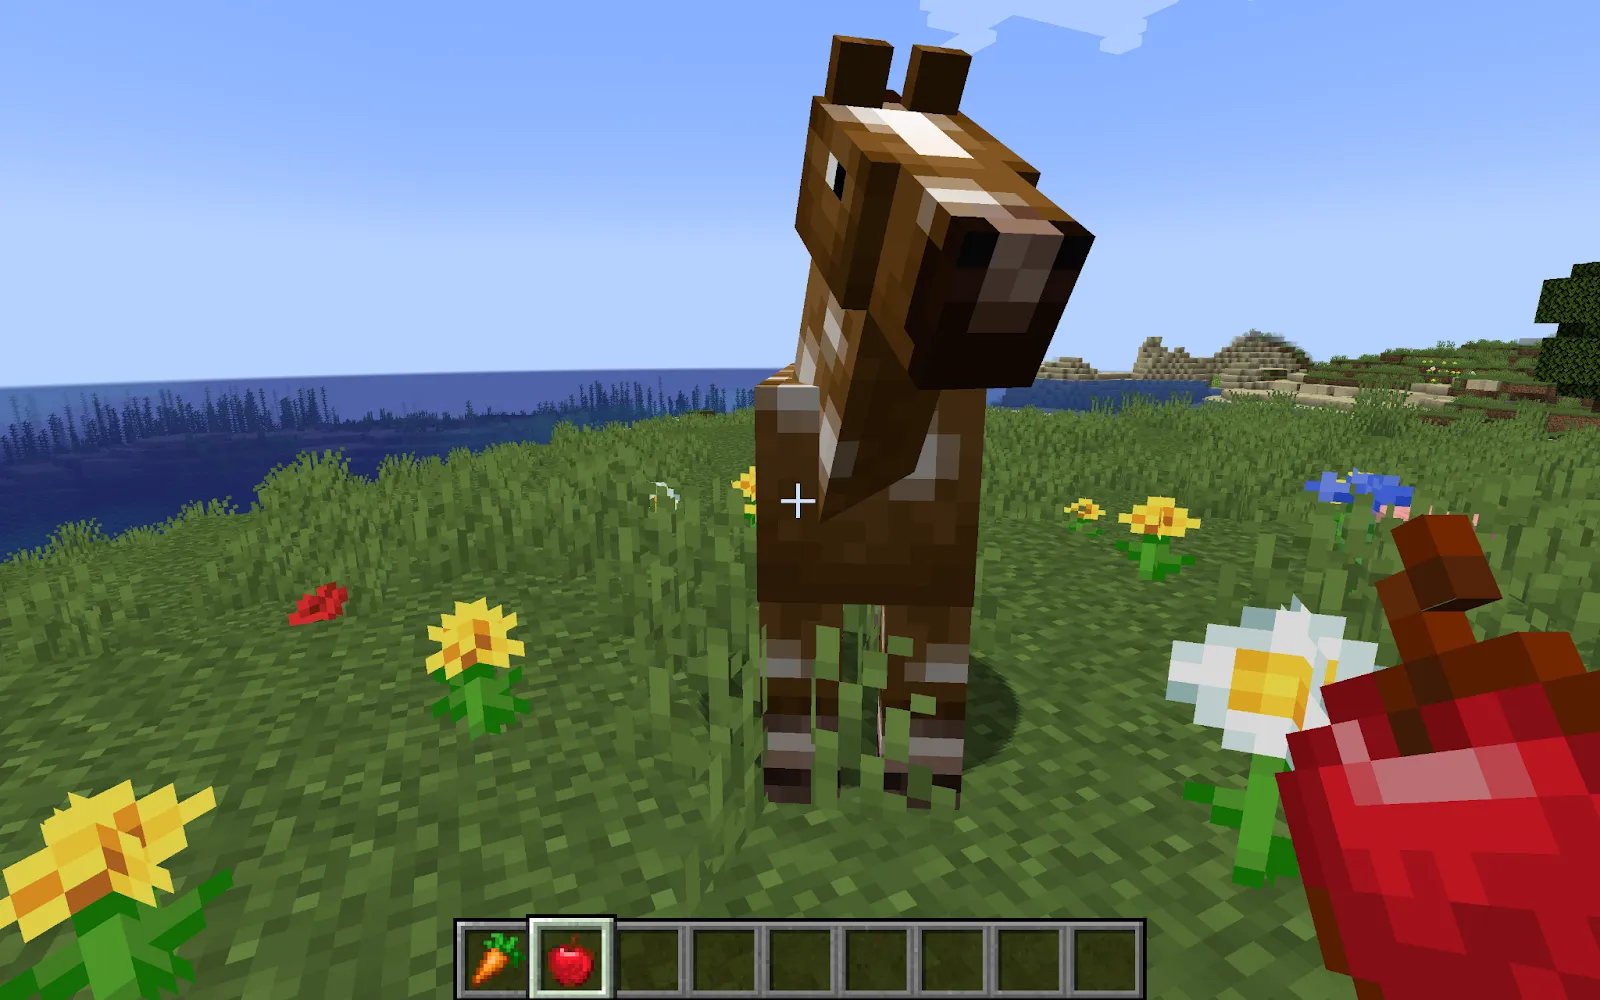 Image of a horse being fed an apple in Minecraft